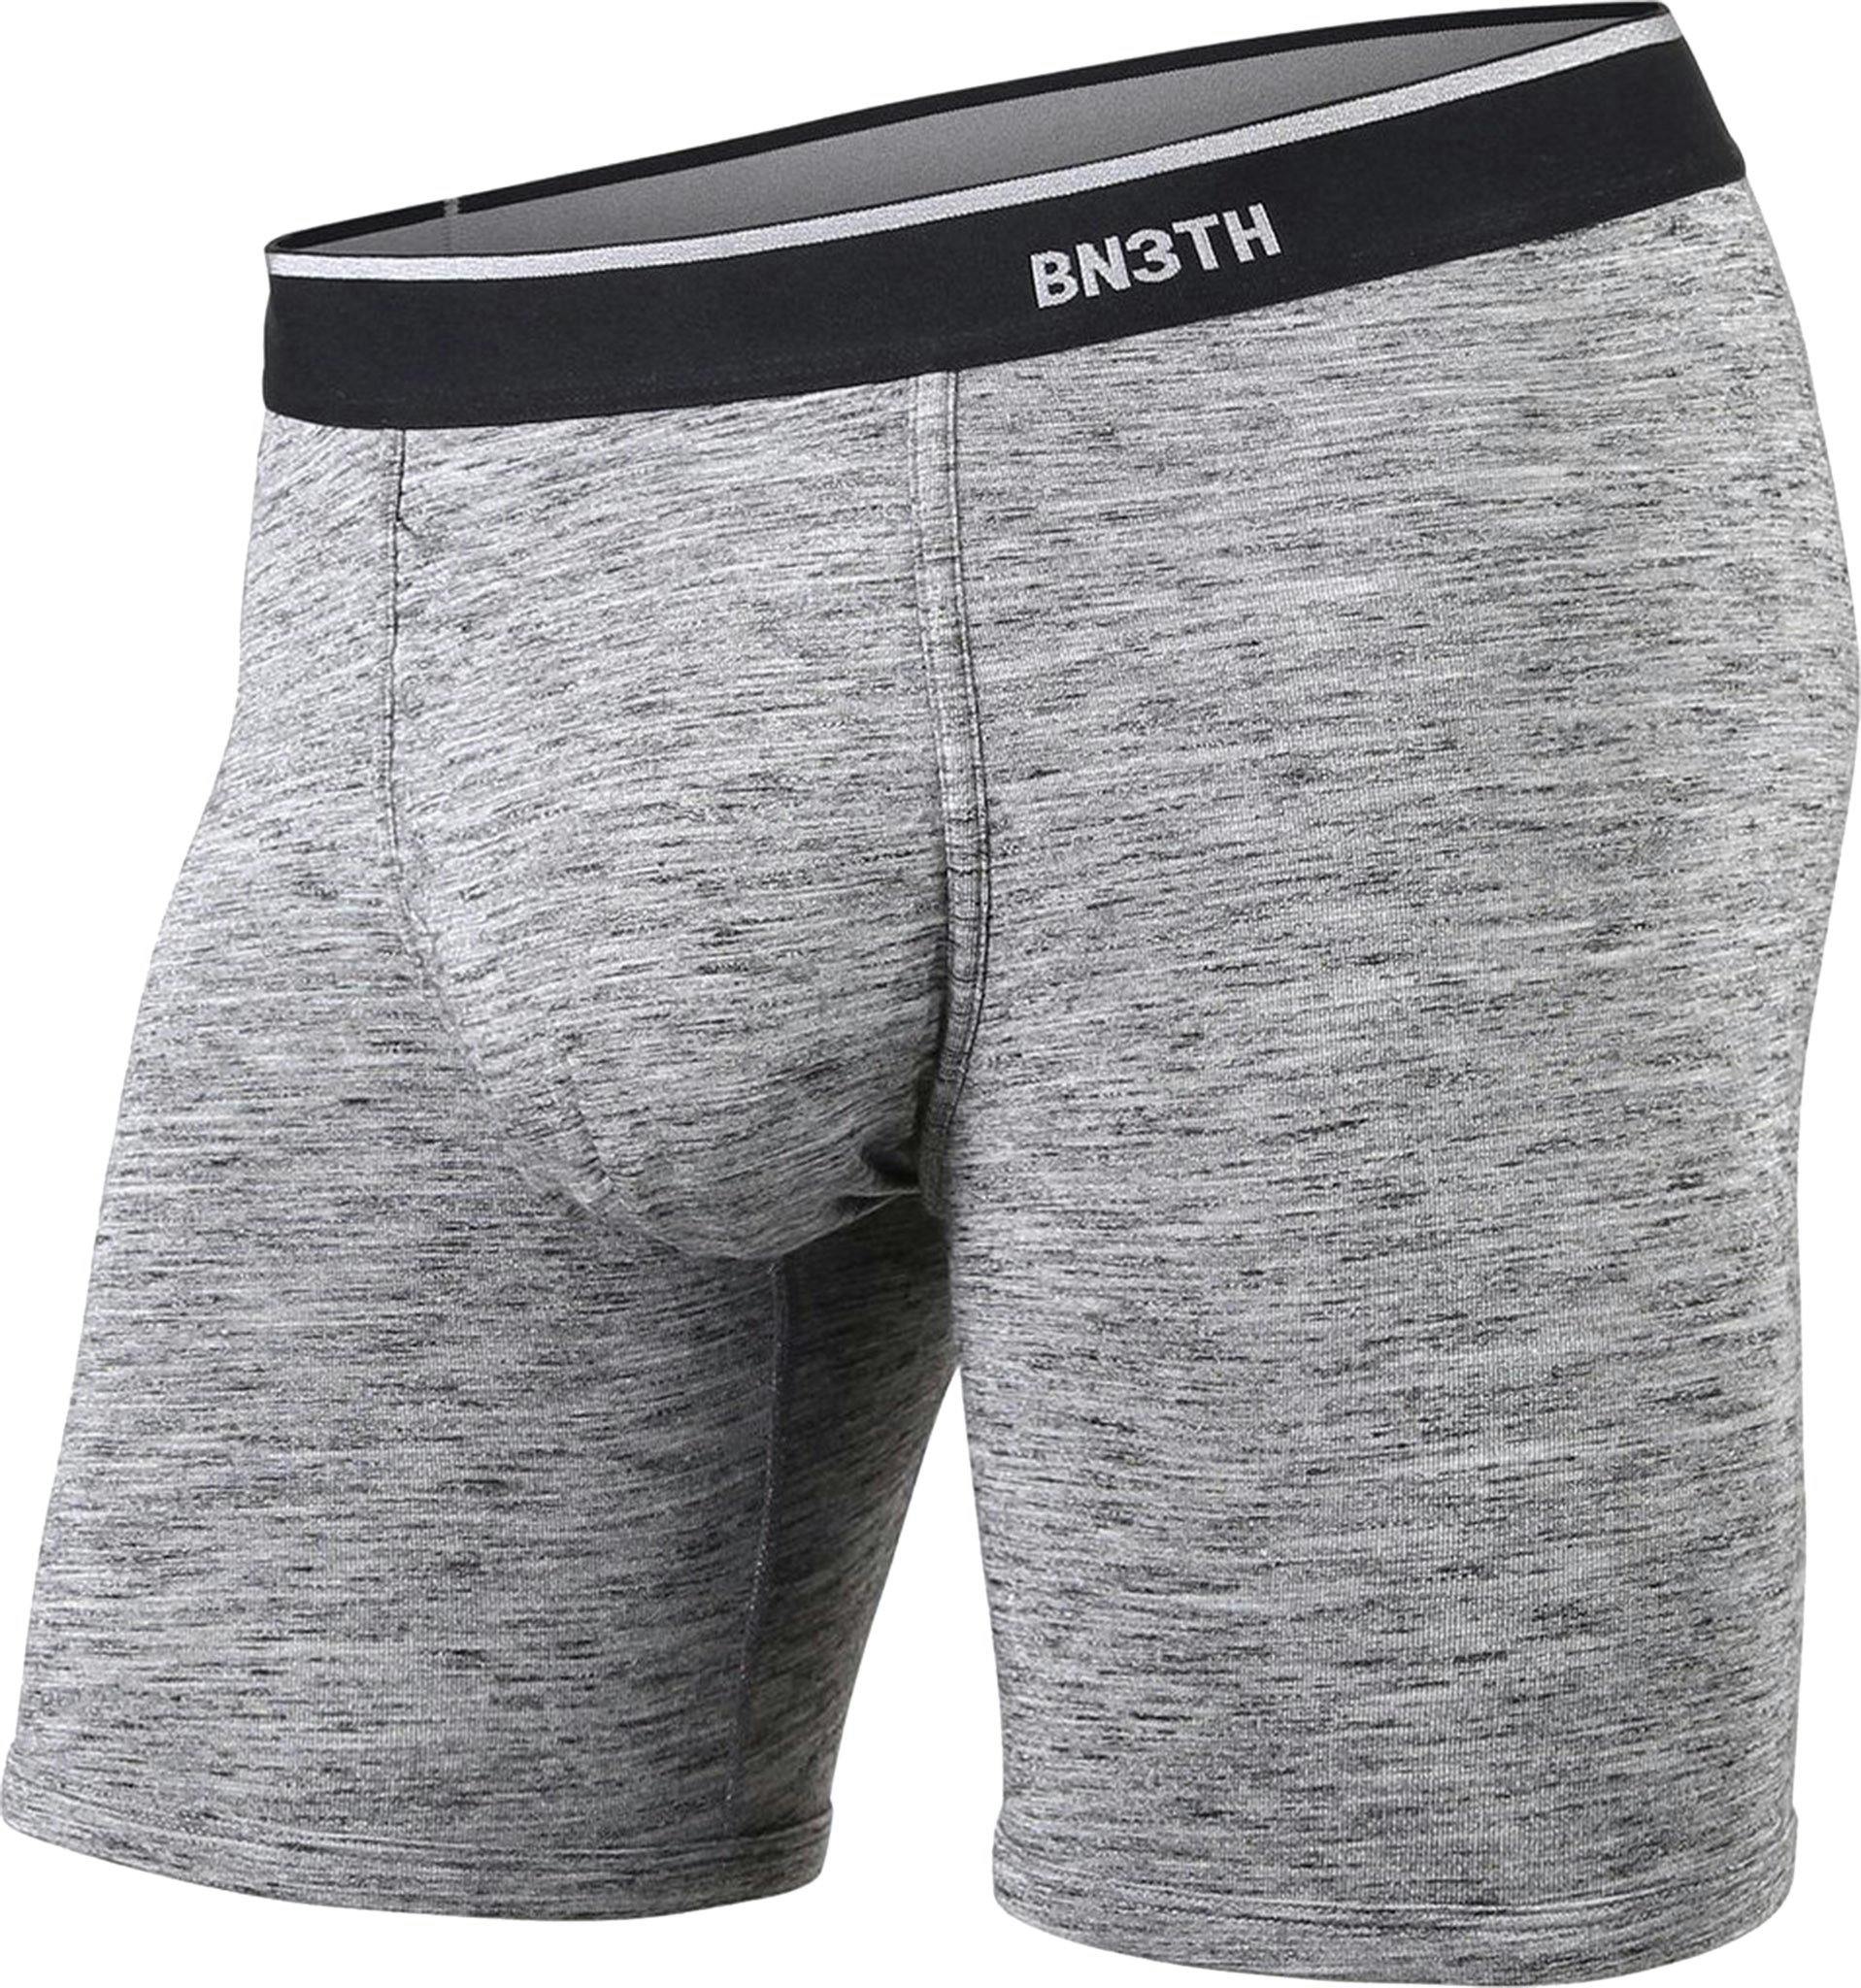 Product image for Classic Boxer Brief Heather - Men's